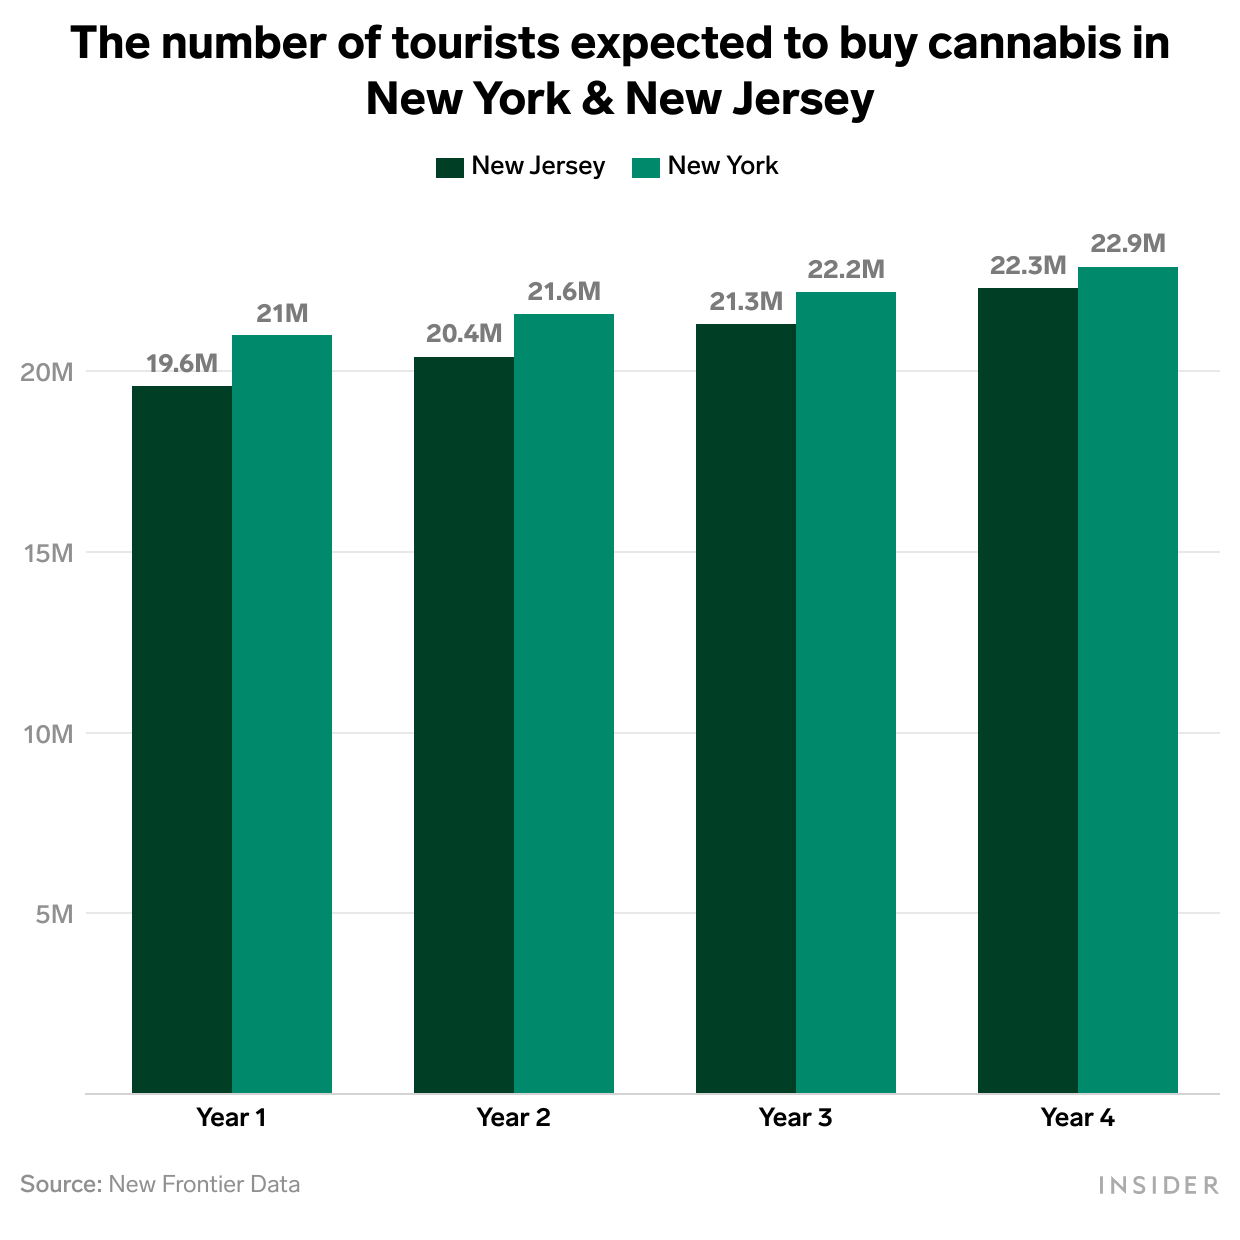 The number of tourists expected to buy cannabis in NY and NJ